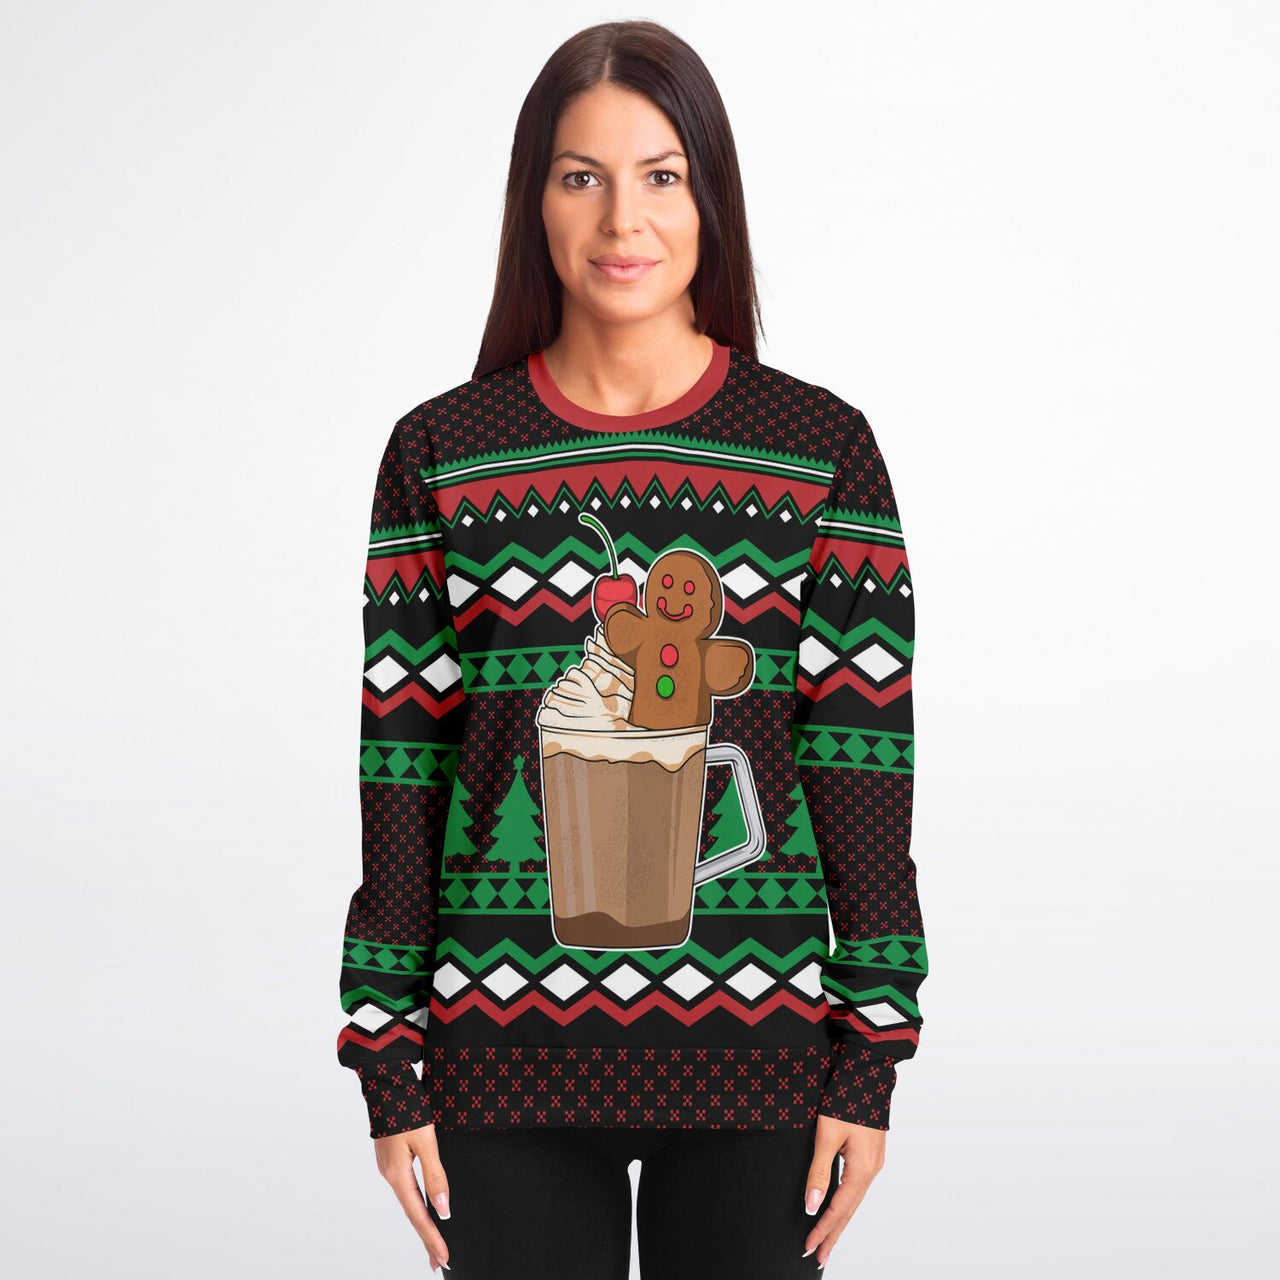 Ginger In A Cup - Ugly Christmas Unisex Sweatshirt